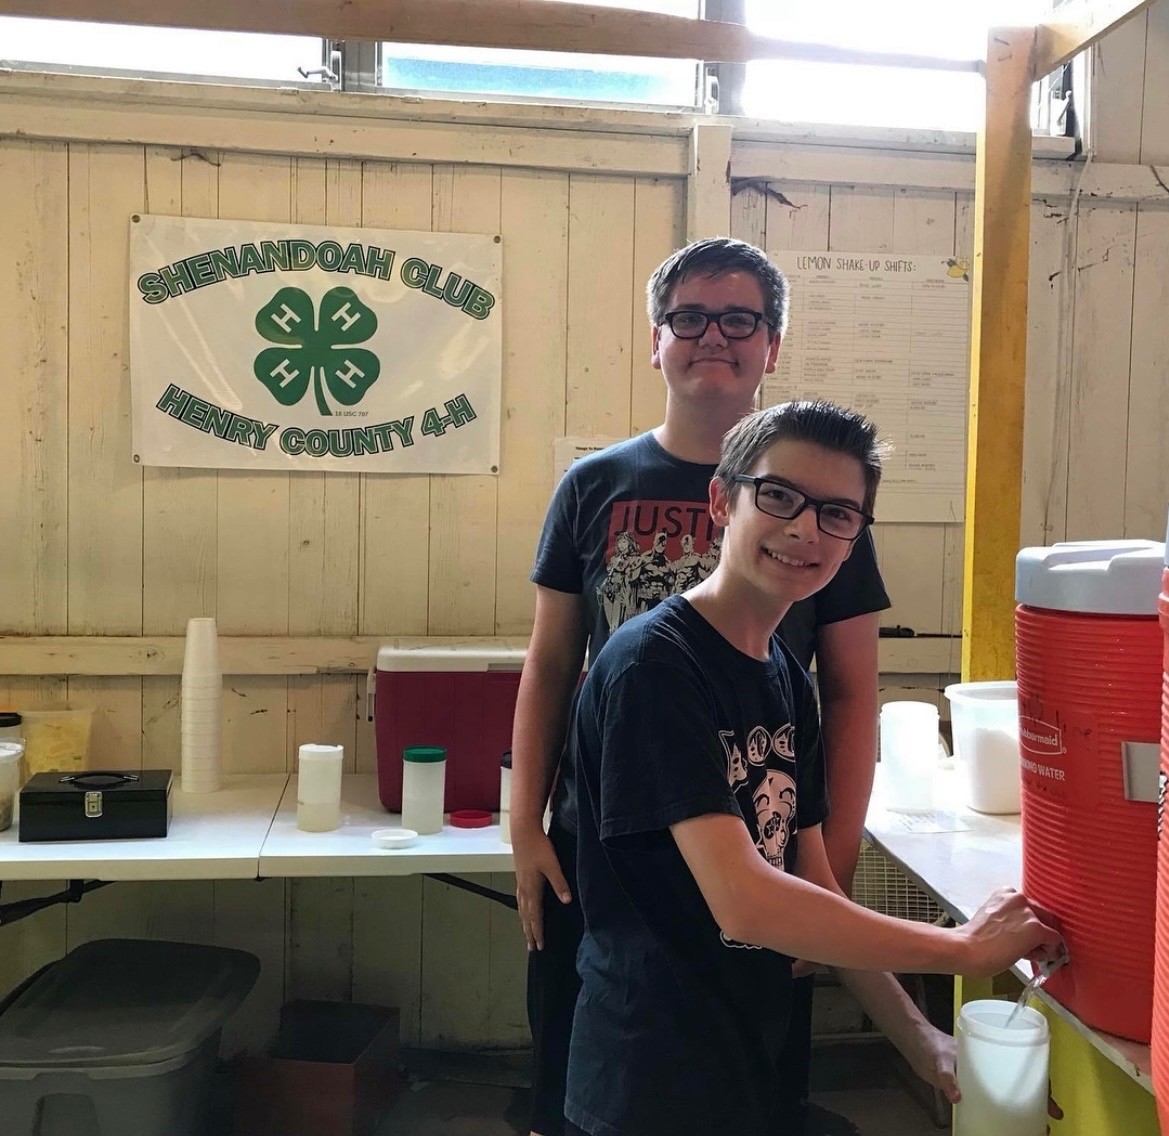 Two male youths stand filling a cup with lemonade in front of a Shenandoah 4-H club banner.